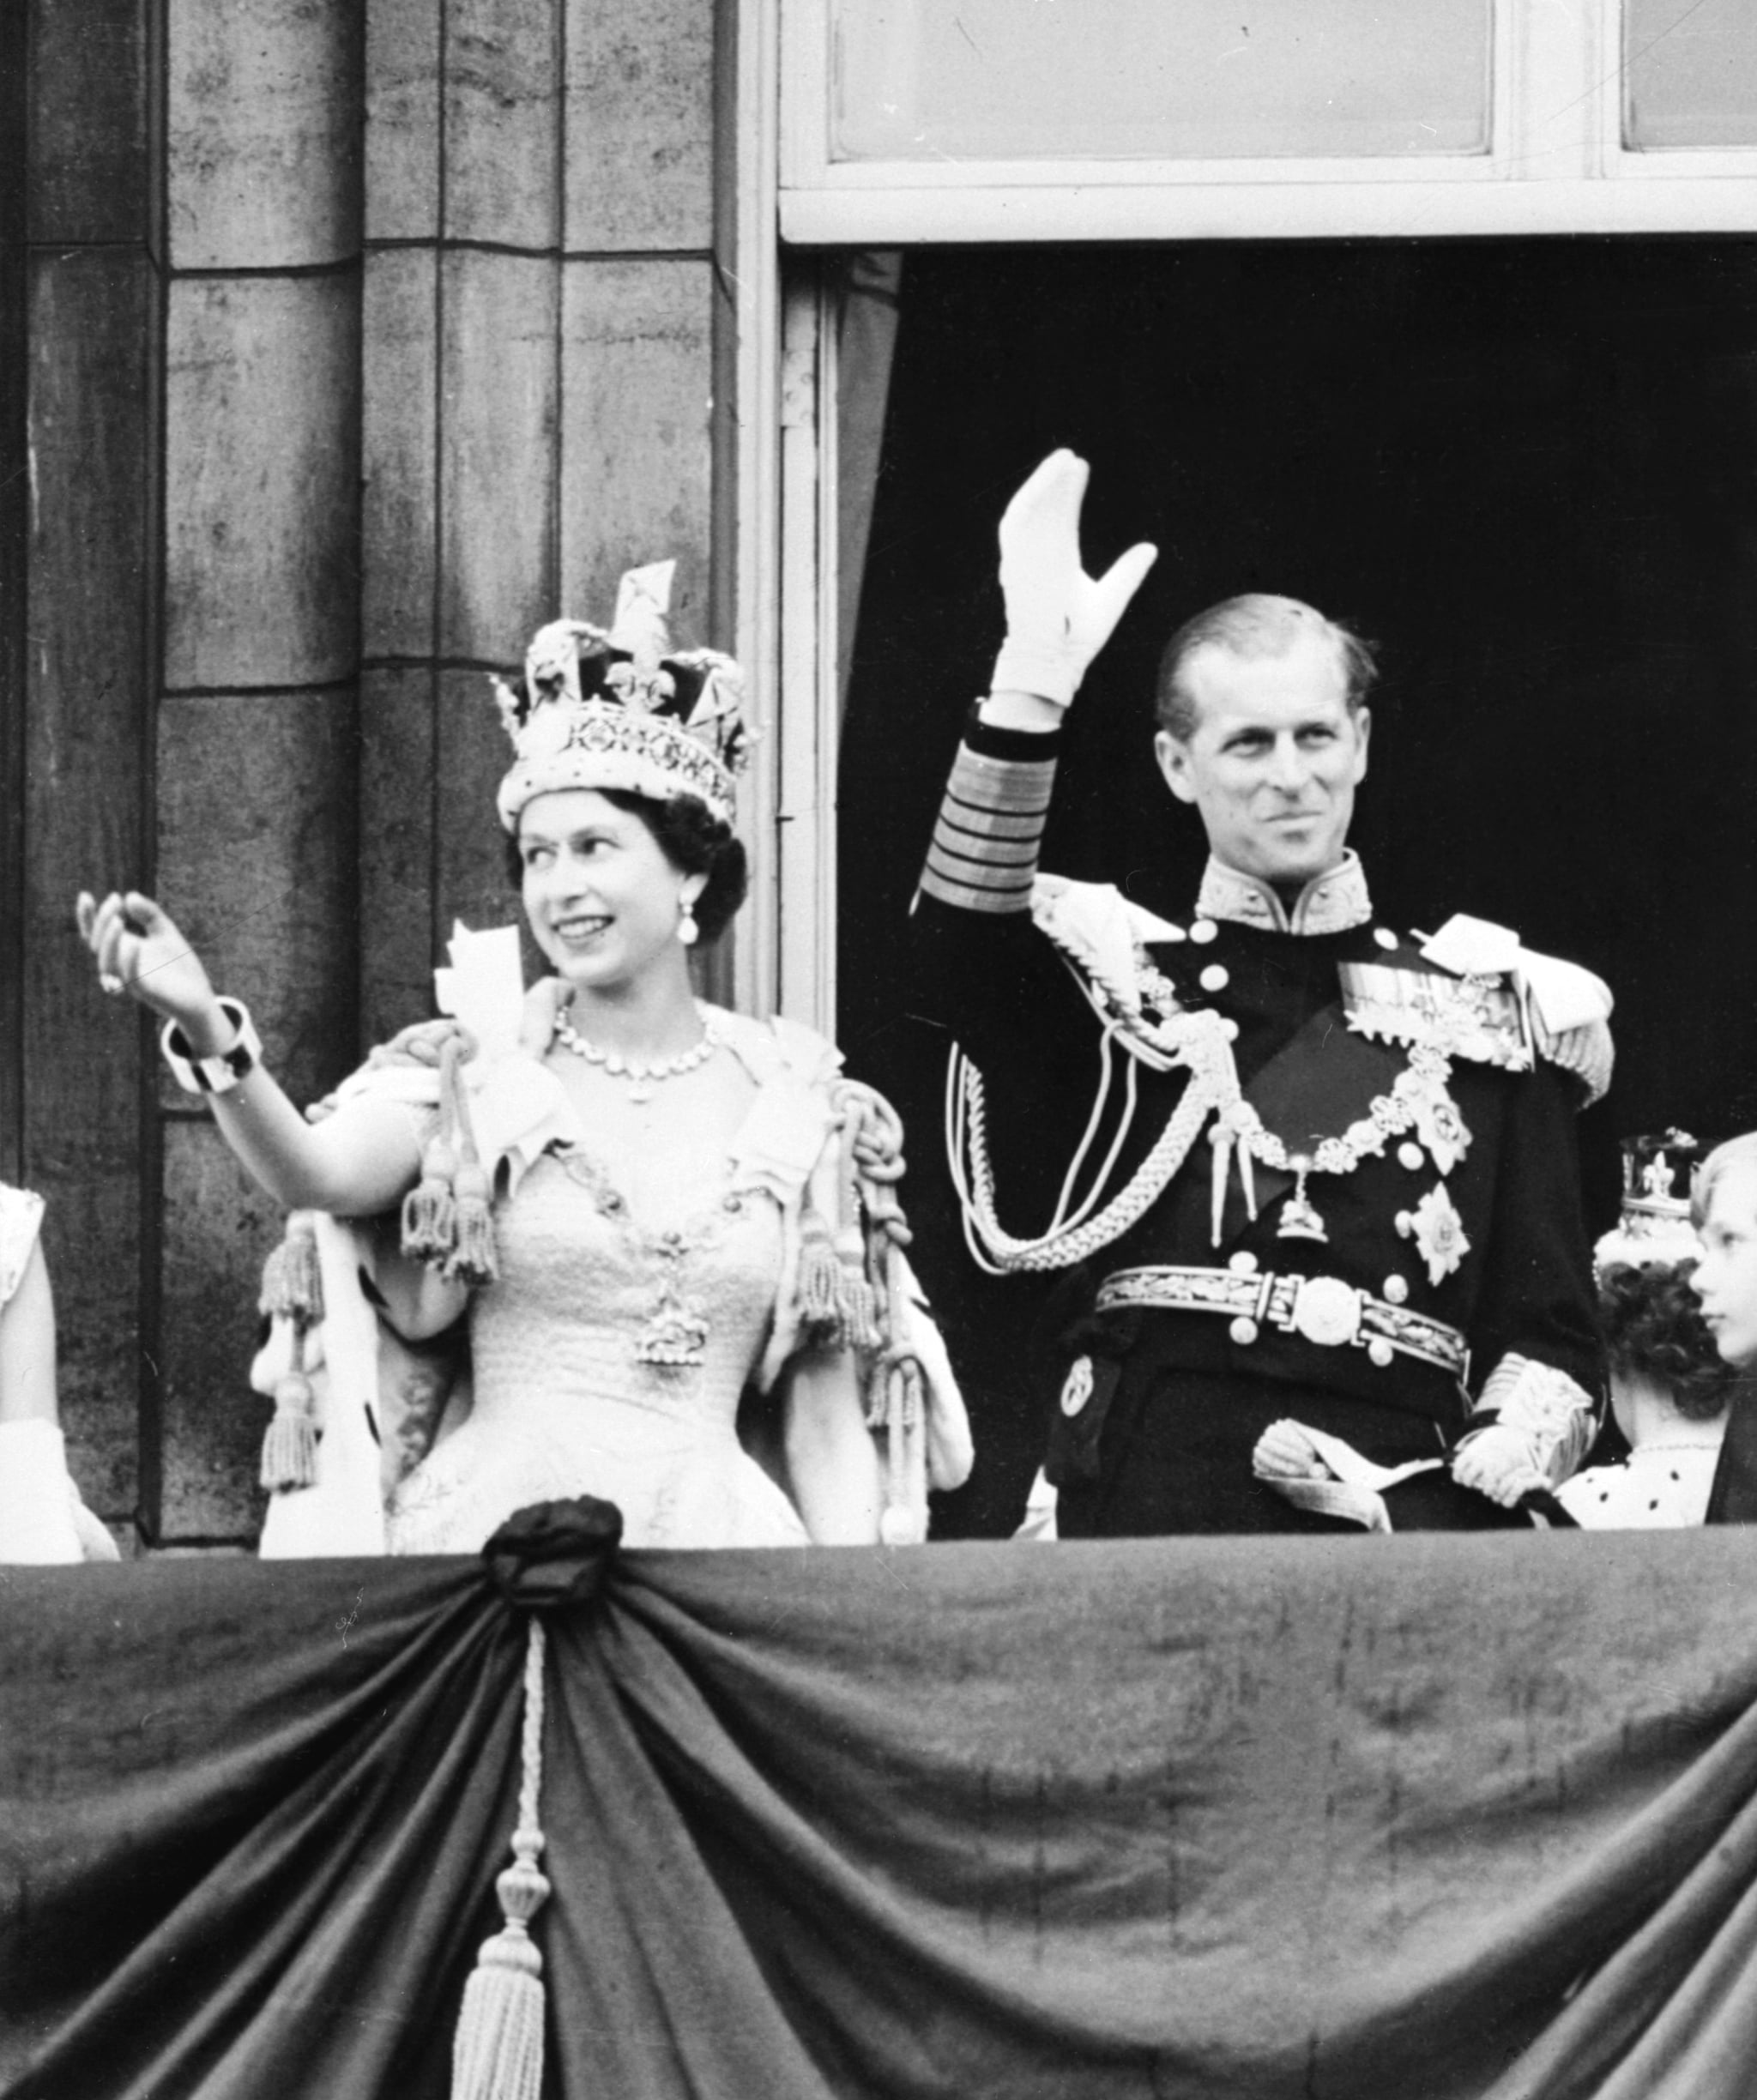 LONDON, UNITED KINGDOM - JUNE 2:  Queen Elizabeth II accompanied by Prince Philip waves to the crowd, 02 June 1953 after being crowned solemnly at Westminter Abbey in London. Elizabeth married the Duke of Edinburgh on the 20th of November 1947 and was proclaimed Queen in 1952 at age 25. Her coronation was the first worldwide televised event.  (Photo credit should read STF/AFP/Getty Images)